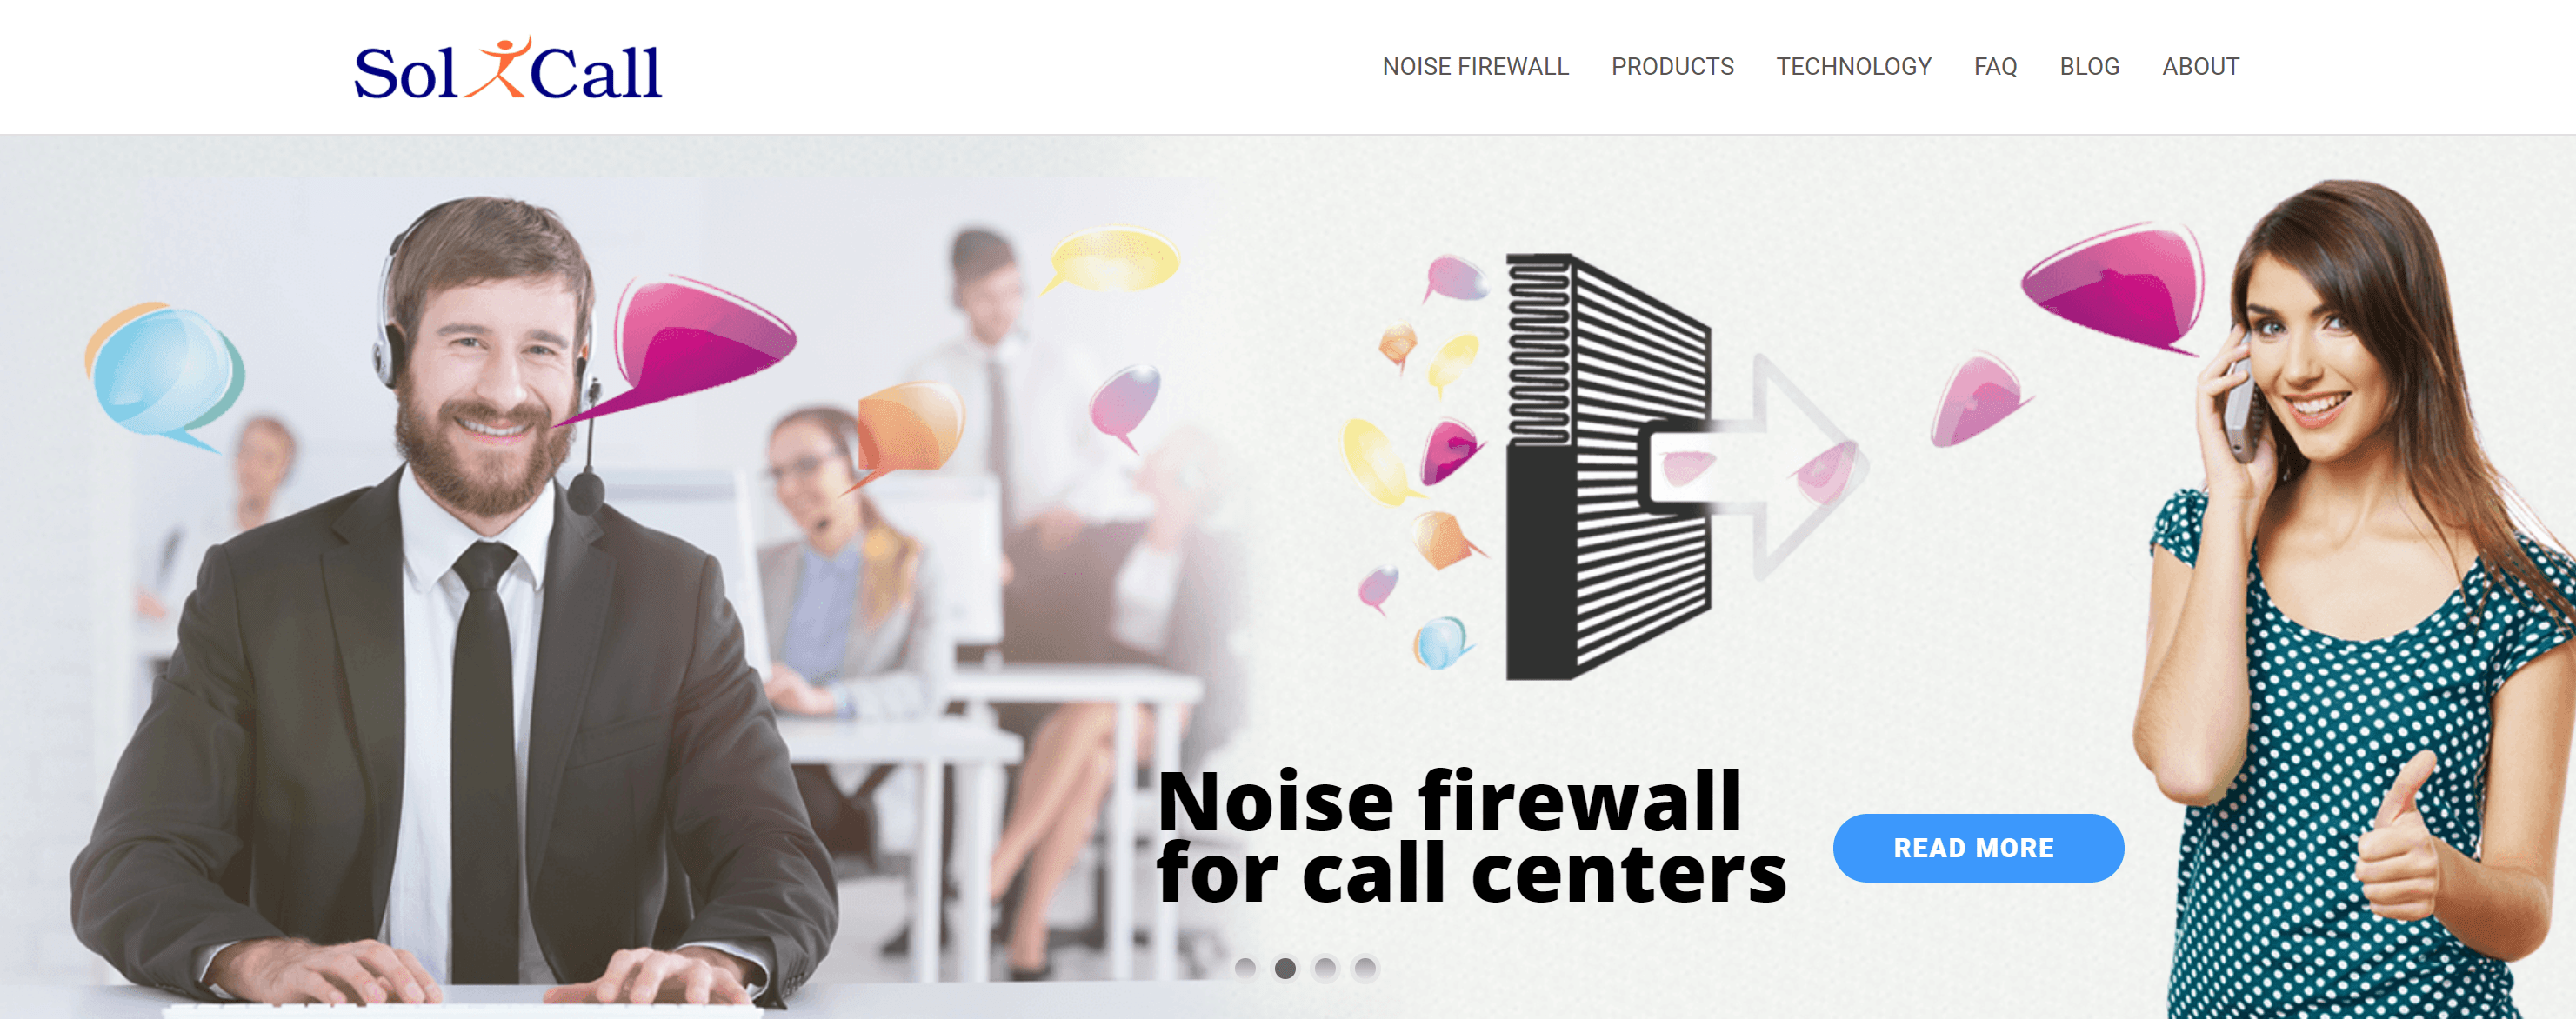 Solicall noise firewall app